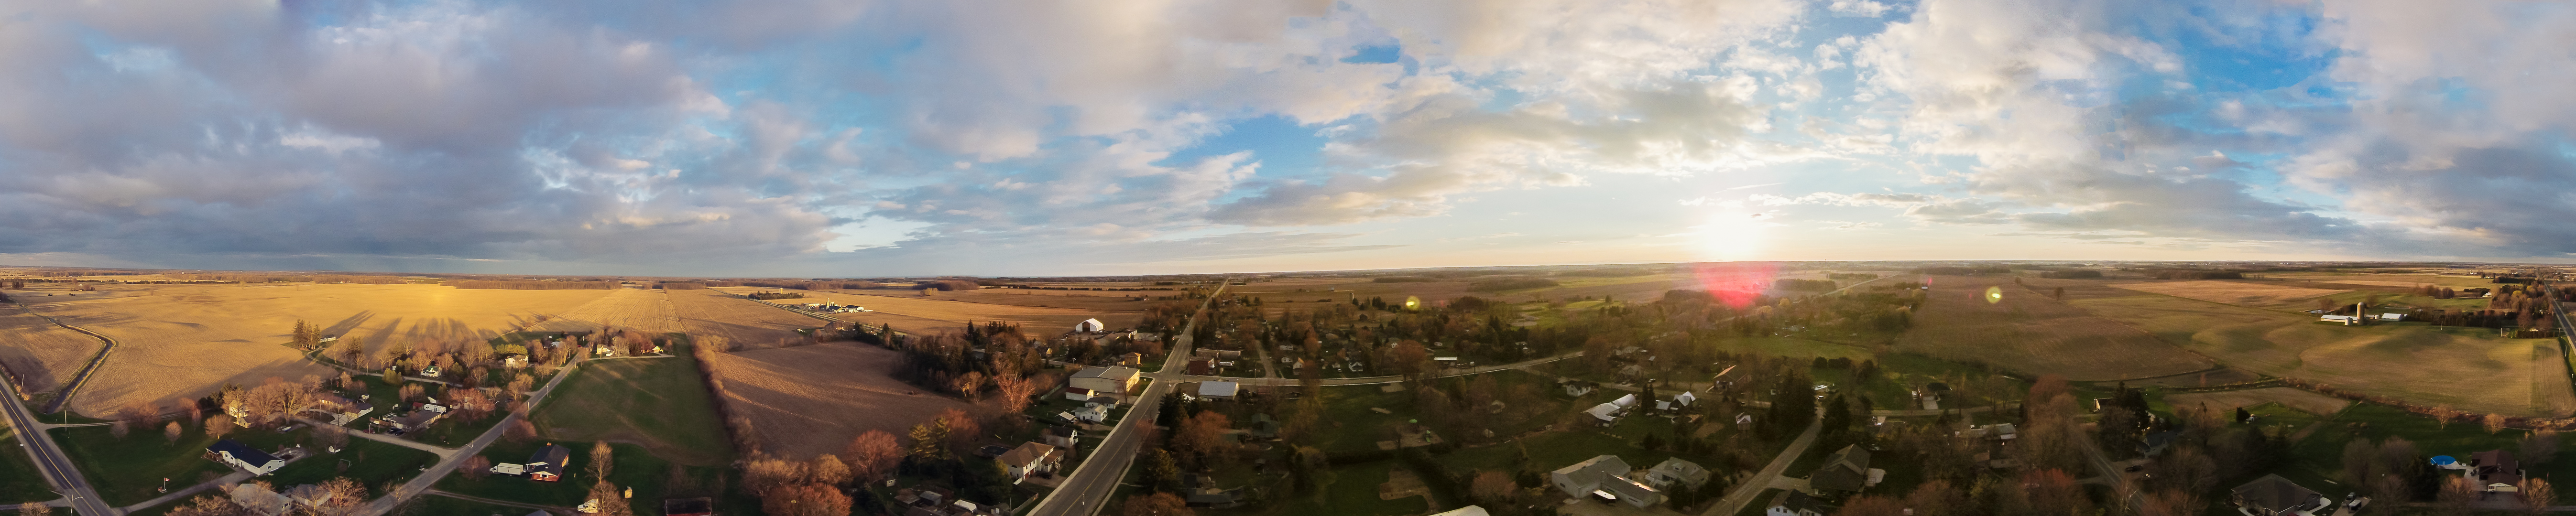 Panorama from 80 Meters